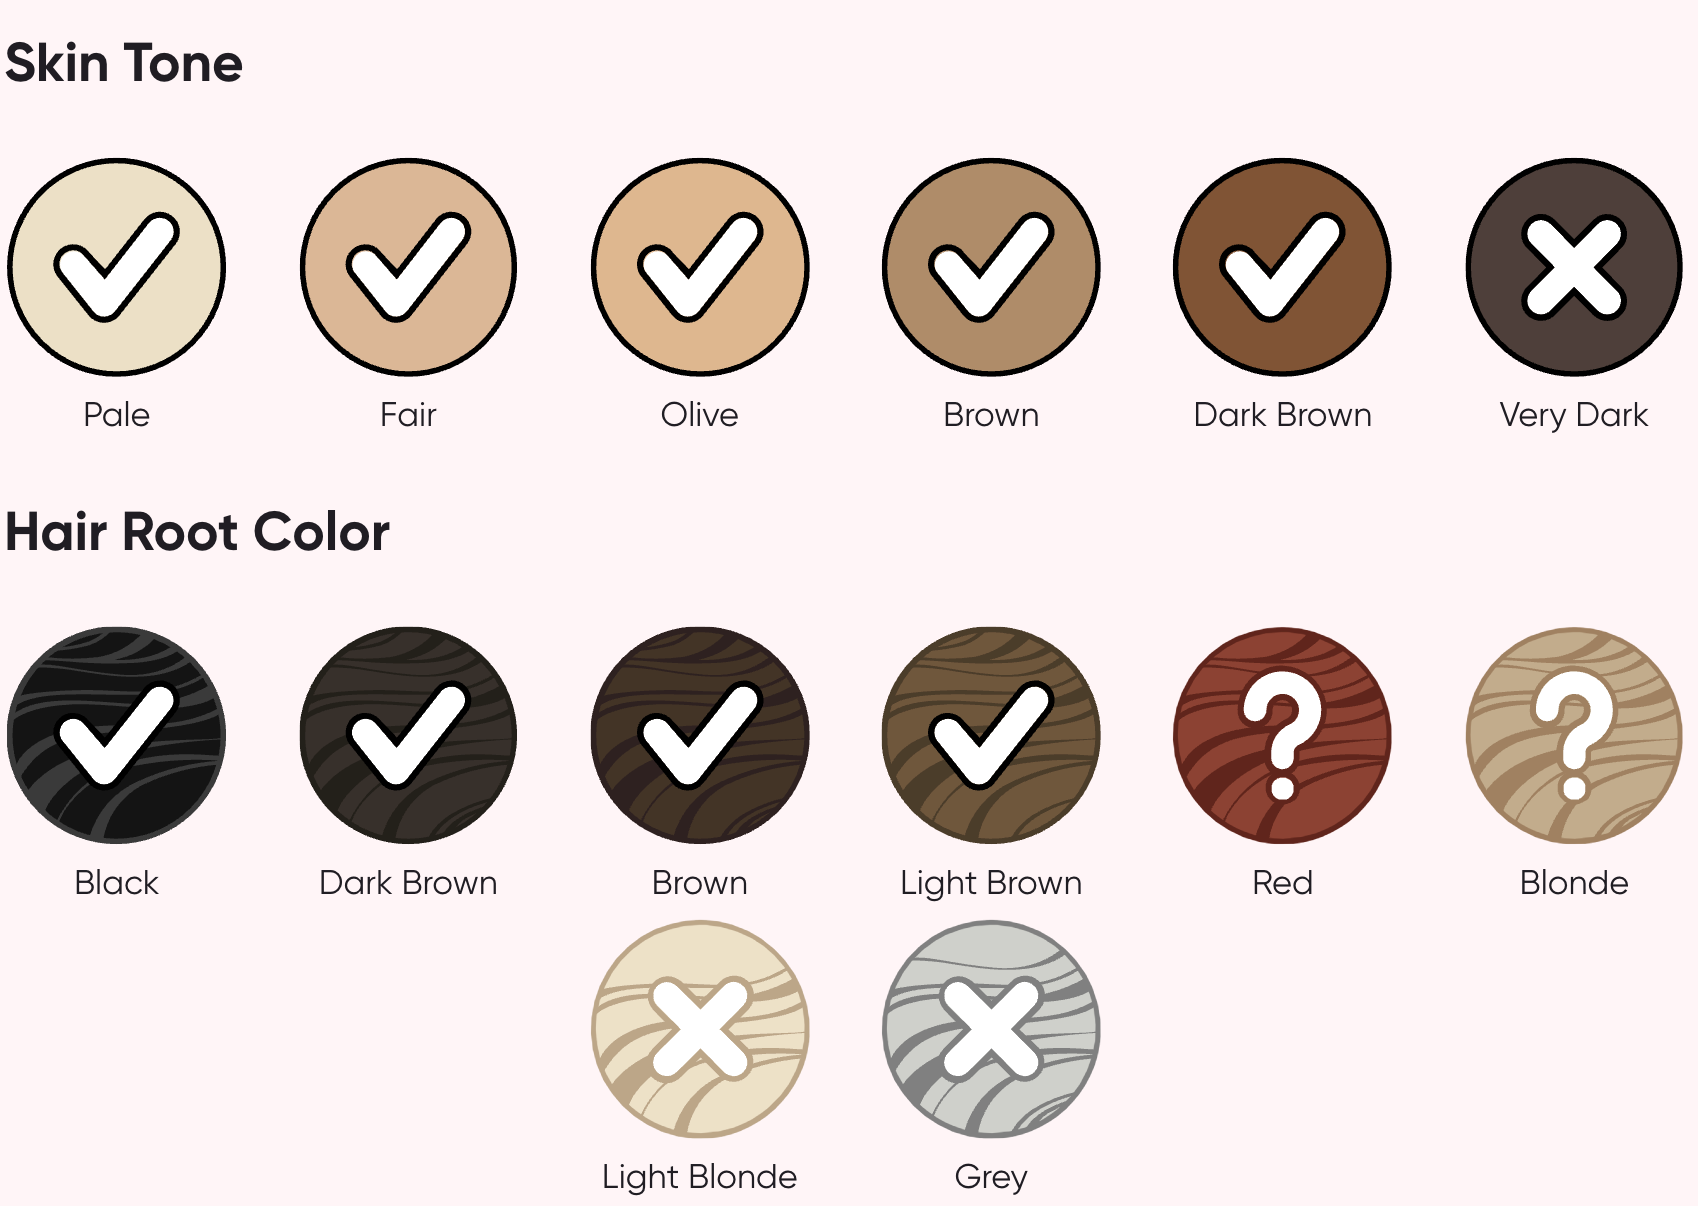 Skin tone and hair color chart for sparklyskin.com